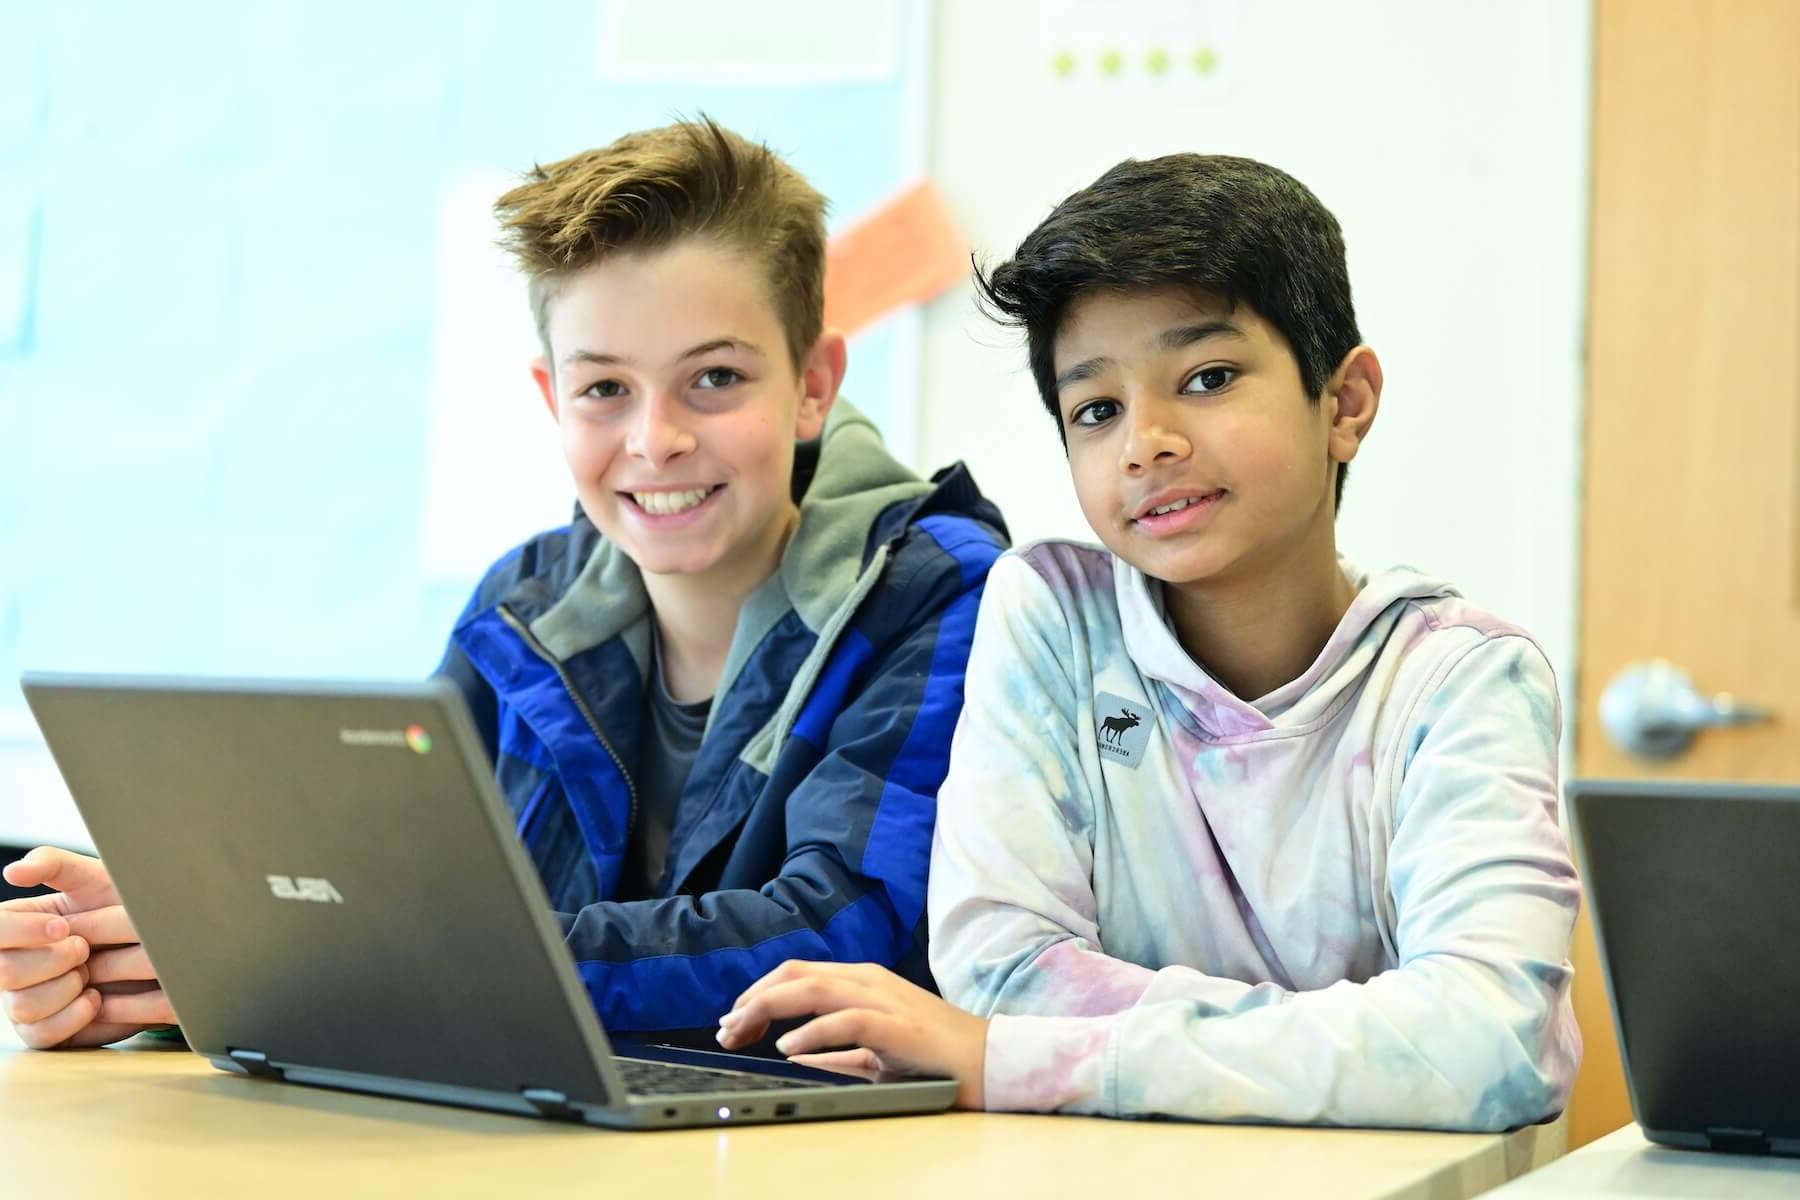 Ethical Culture Fieldston School Middle School students working together on computer pause to smile for the camera